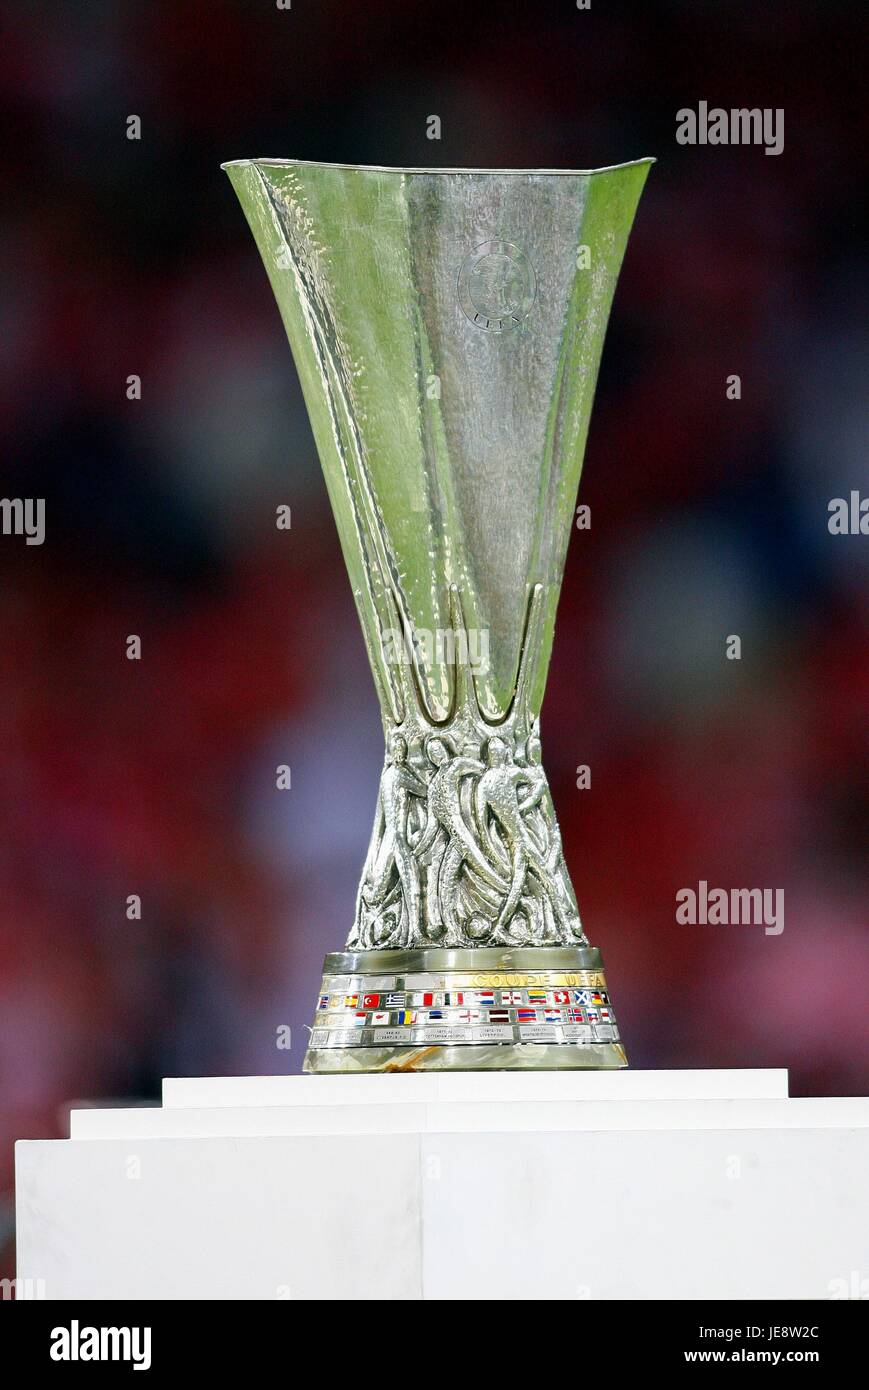 UEFA CUP FOOTBALL TROPHY PHILIPS STADIUM EINDHOVEN HOLLAND 10 May 2006 Stock Photo